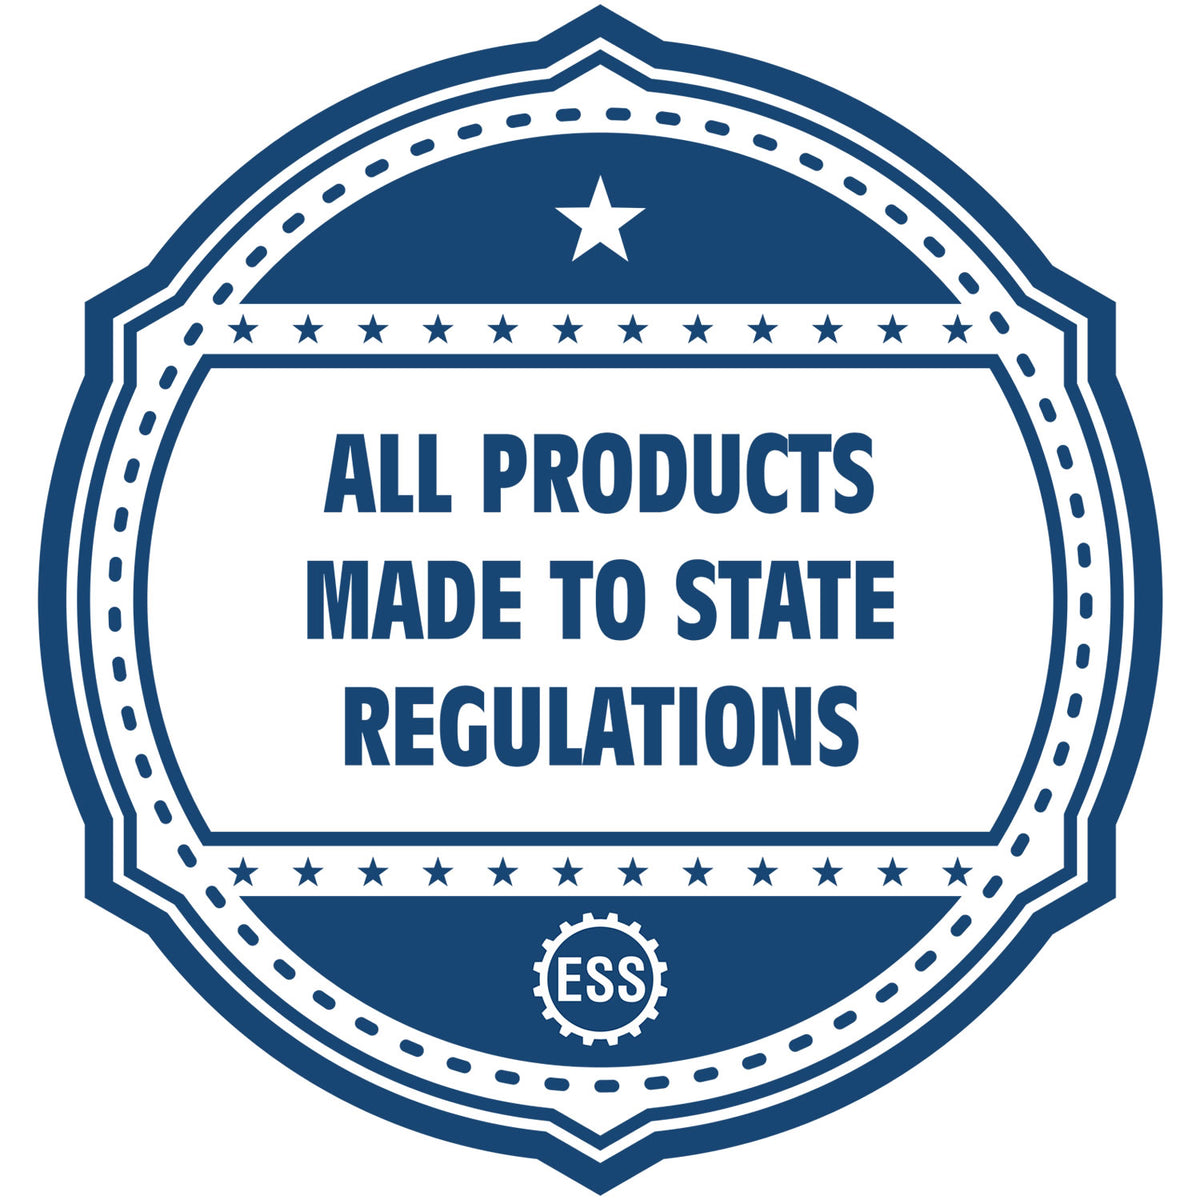 An icon or badge element for the Super Slim Wyoming Notary Public Stamp showing that this product is made in compliance with state regulations.